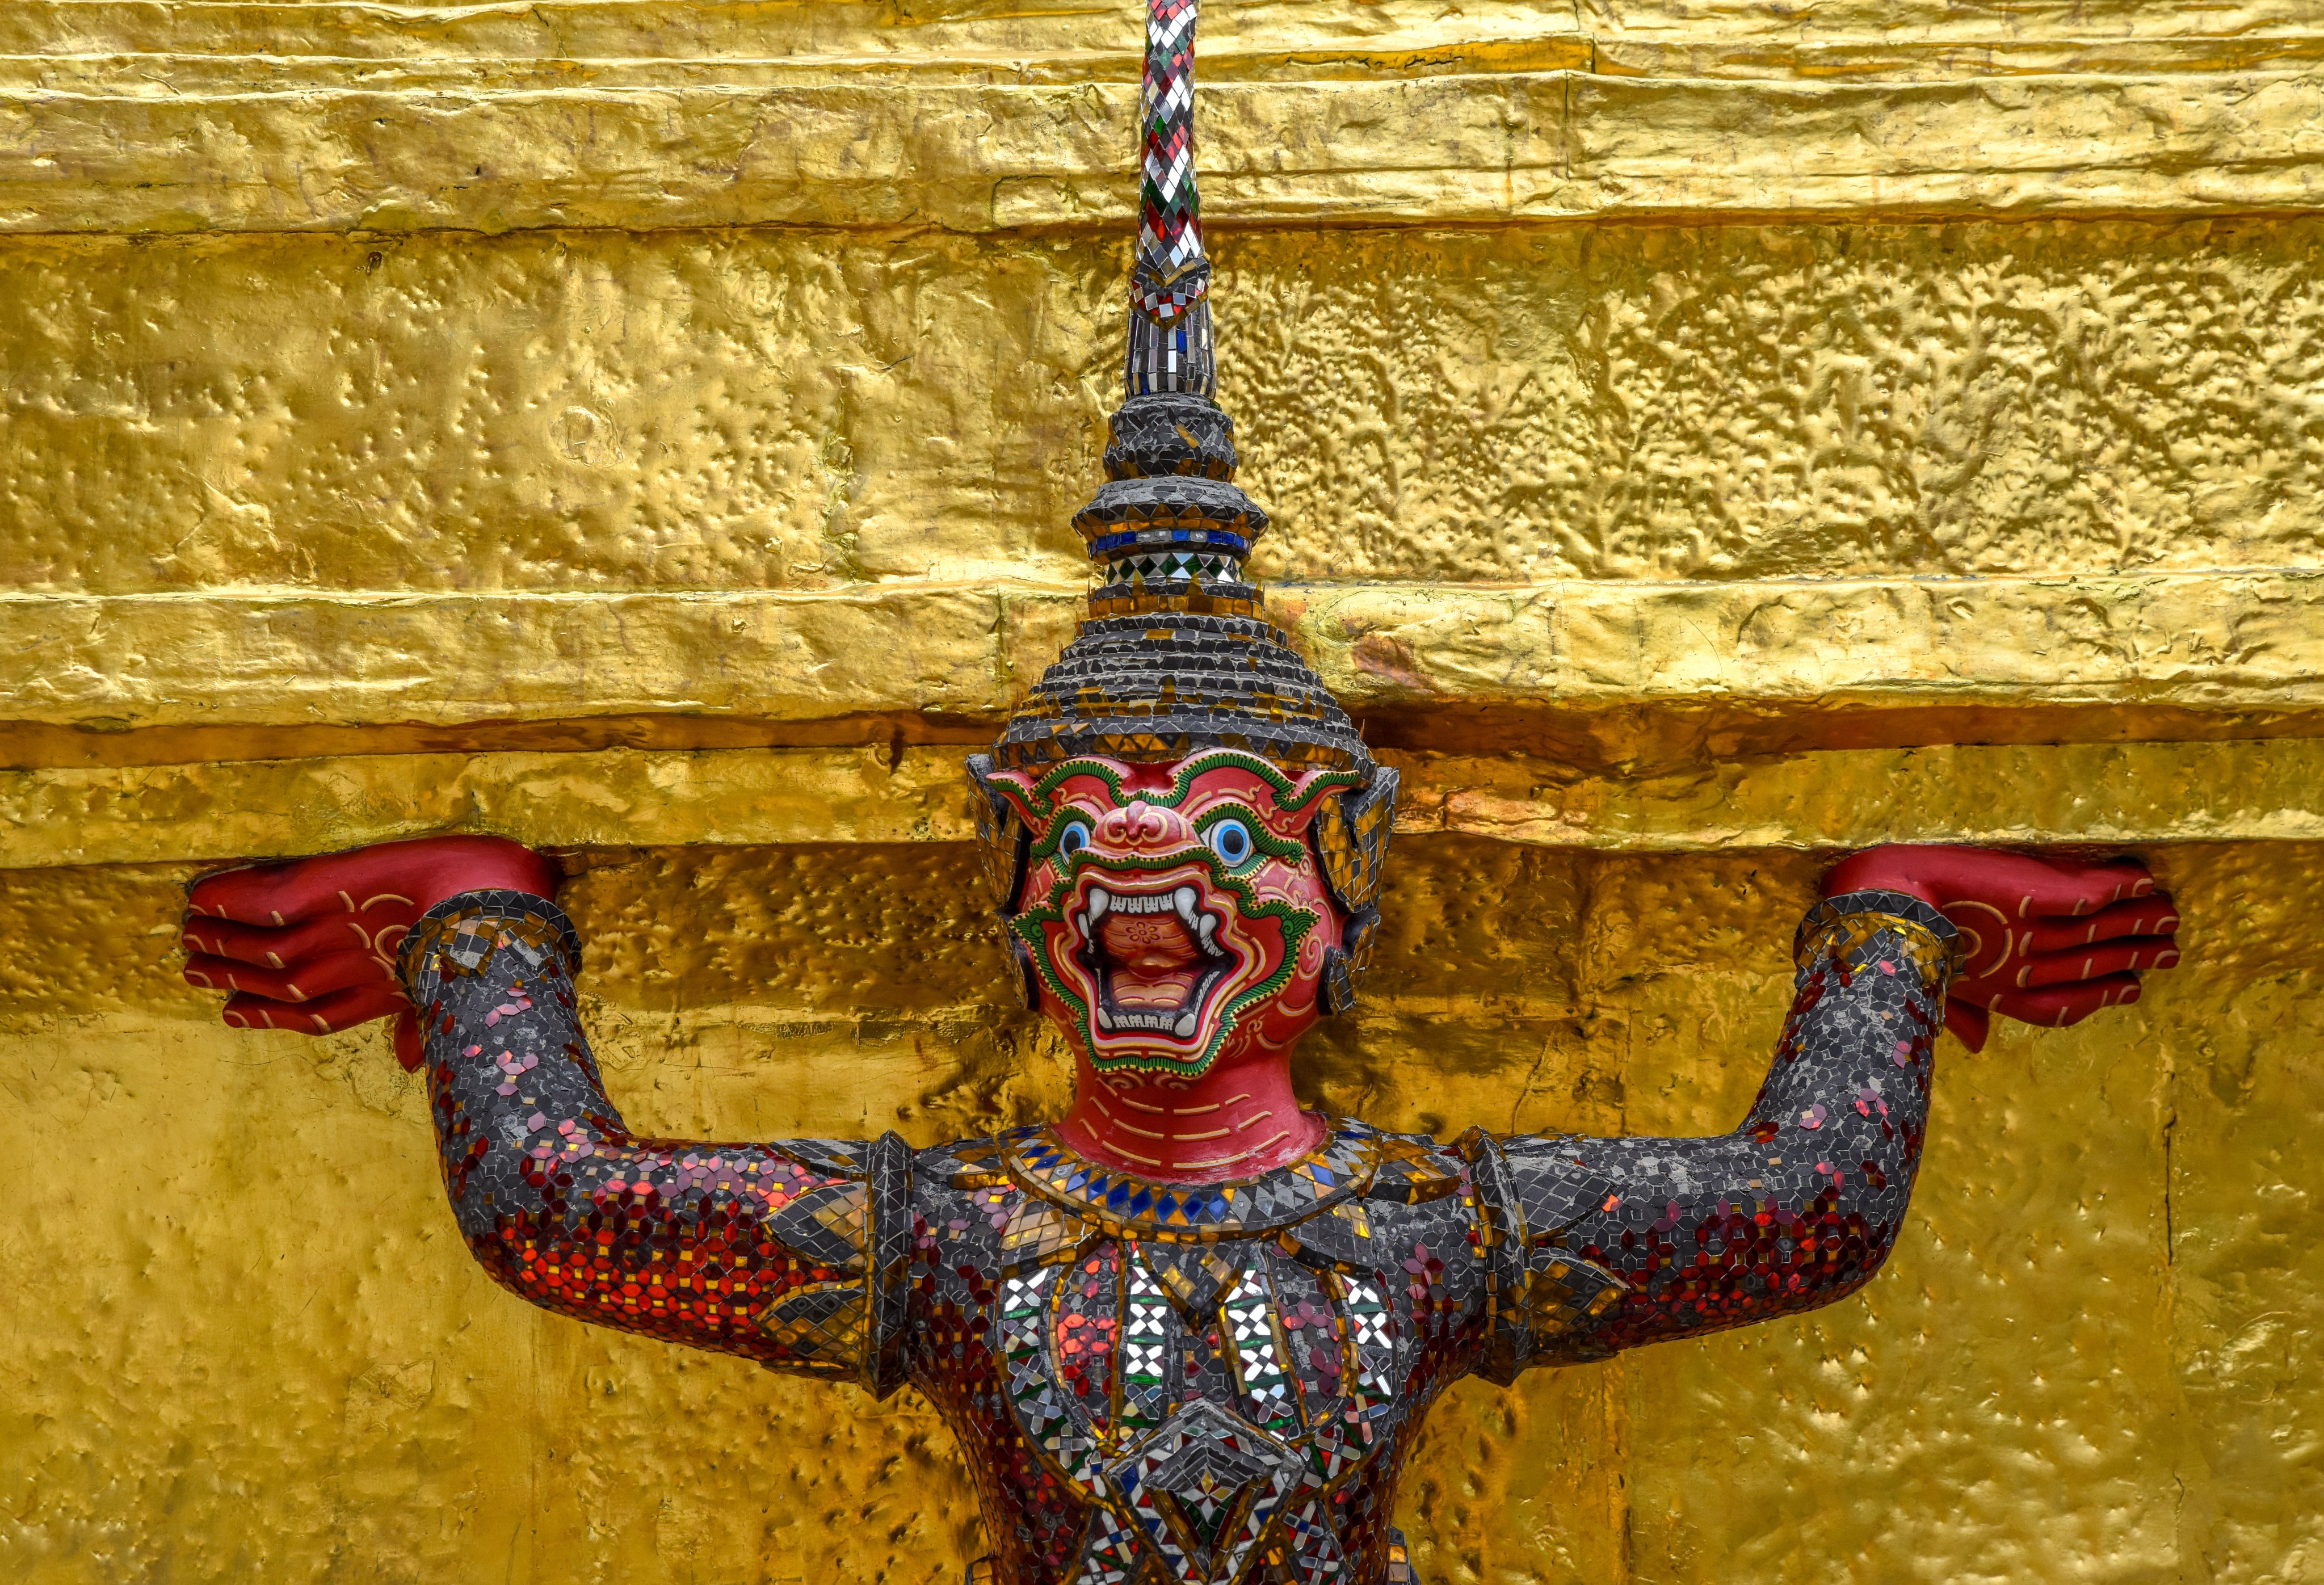 Statues and murals of Yaksha, the mythological shape-shifting creatures that protect Thailand’s most sacred sites, are found from Bangkok to Chiang Mai. We explore their Indian roots, and where to find them. Photo: Ronan O’Connell